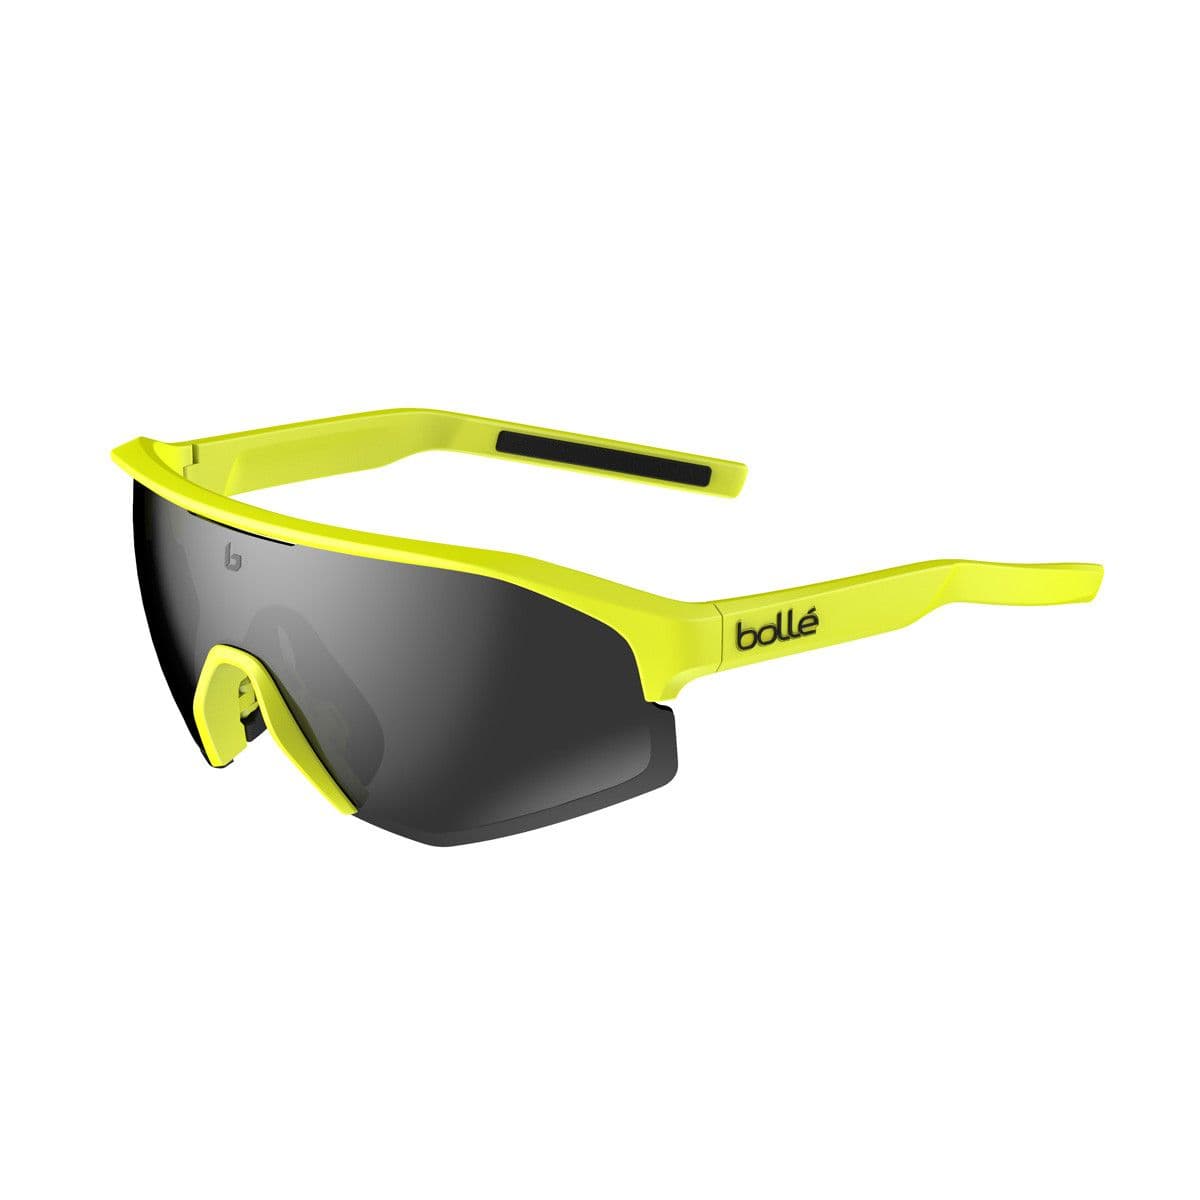 Bolle Lightshifter XL Sunglasses